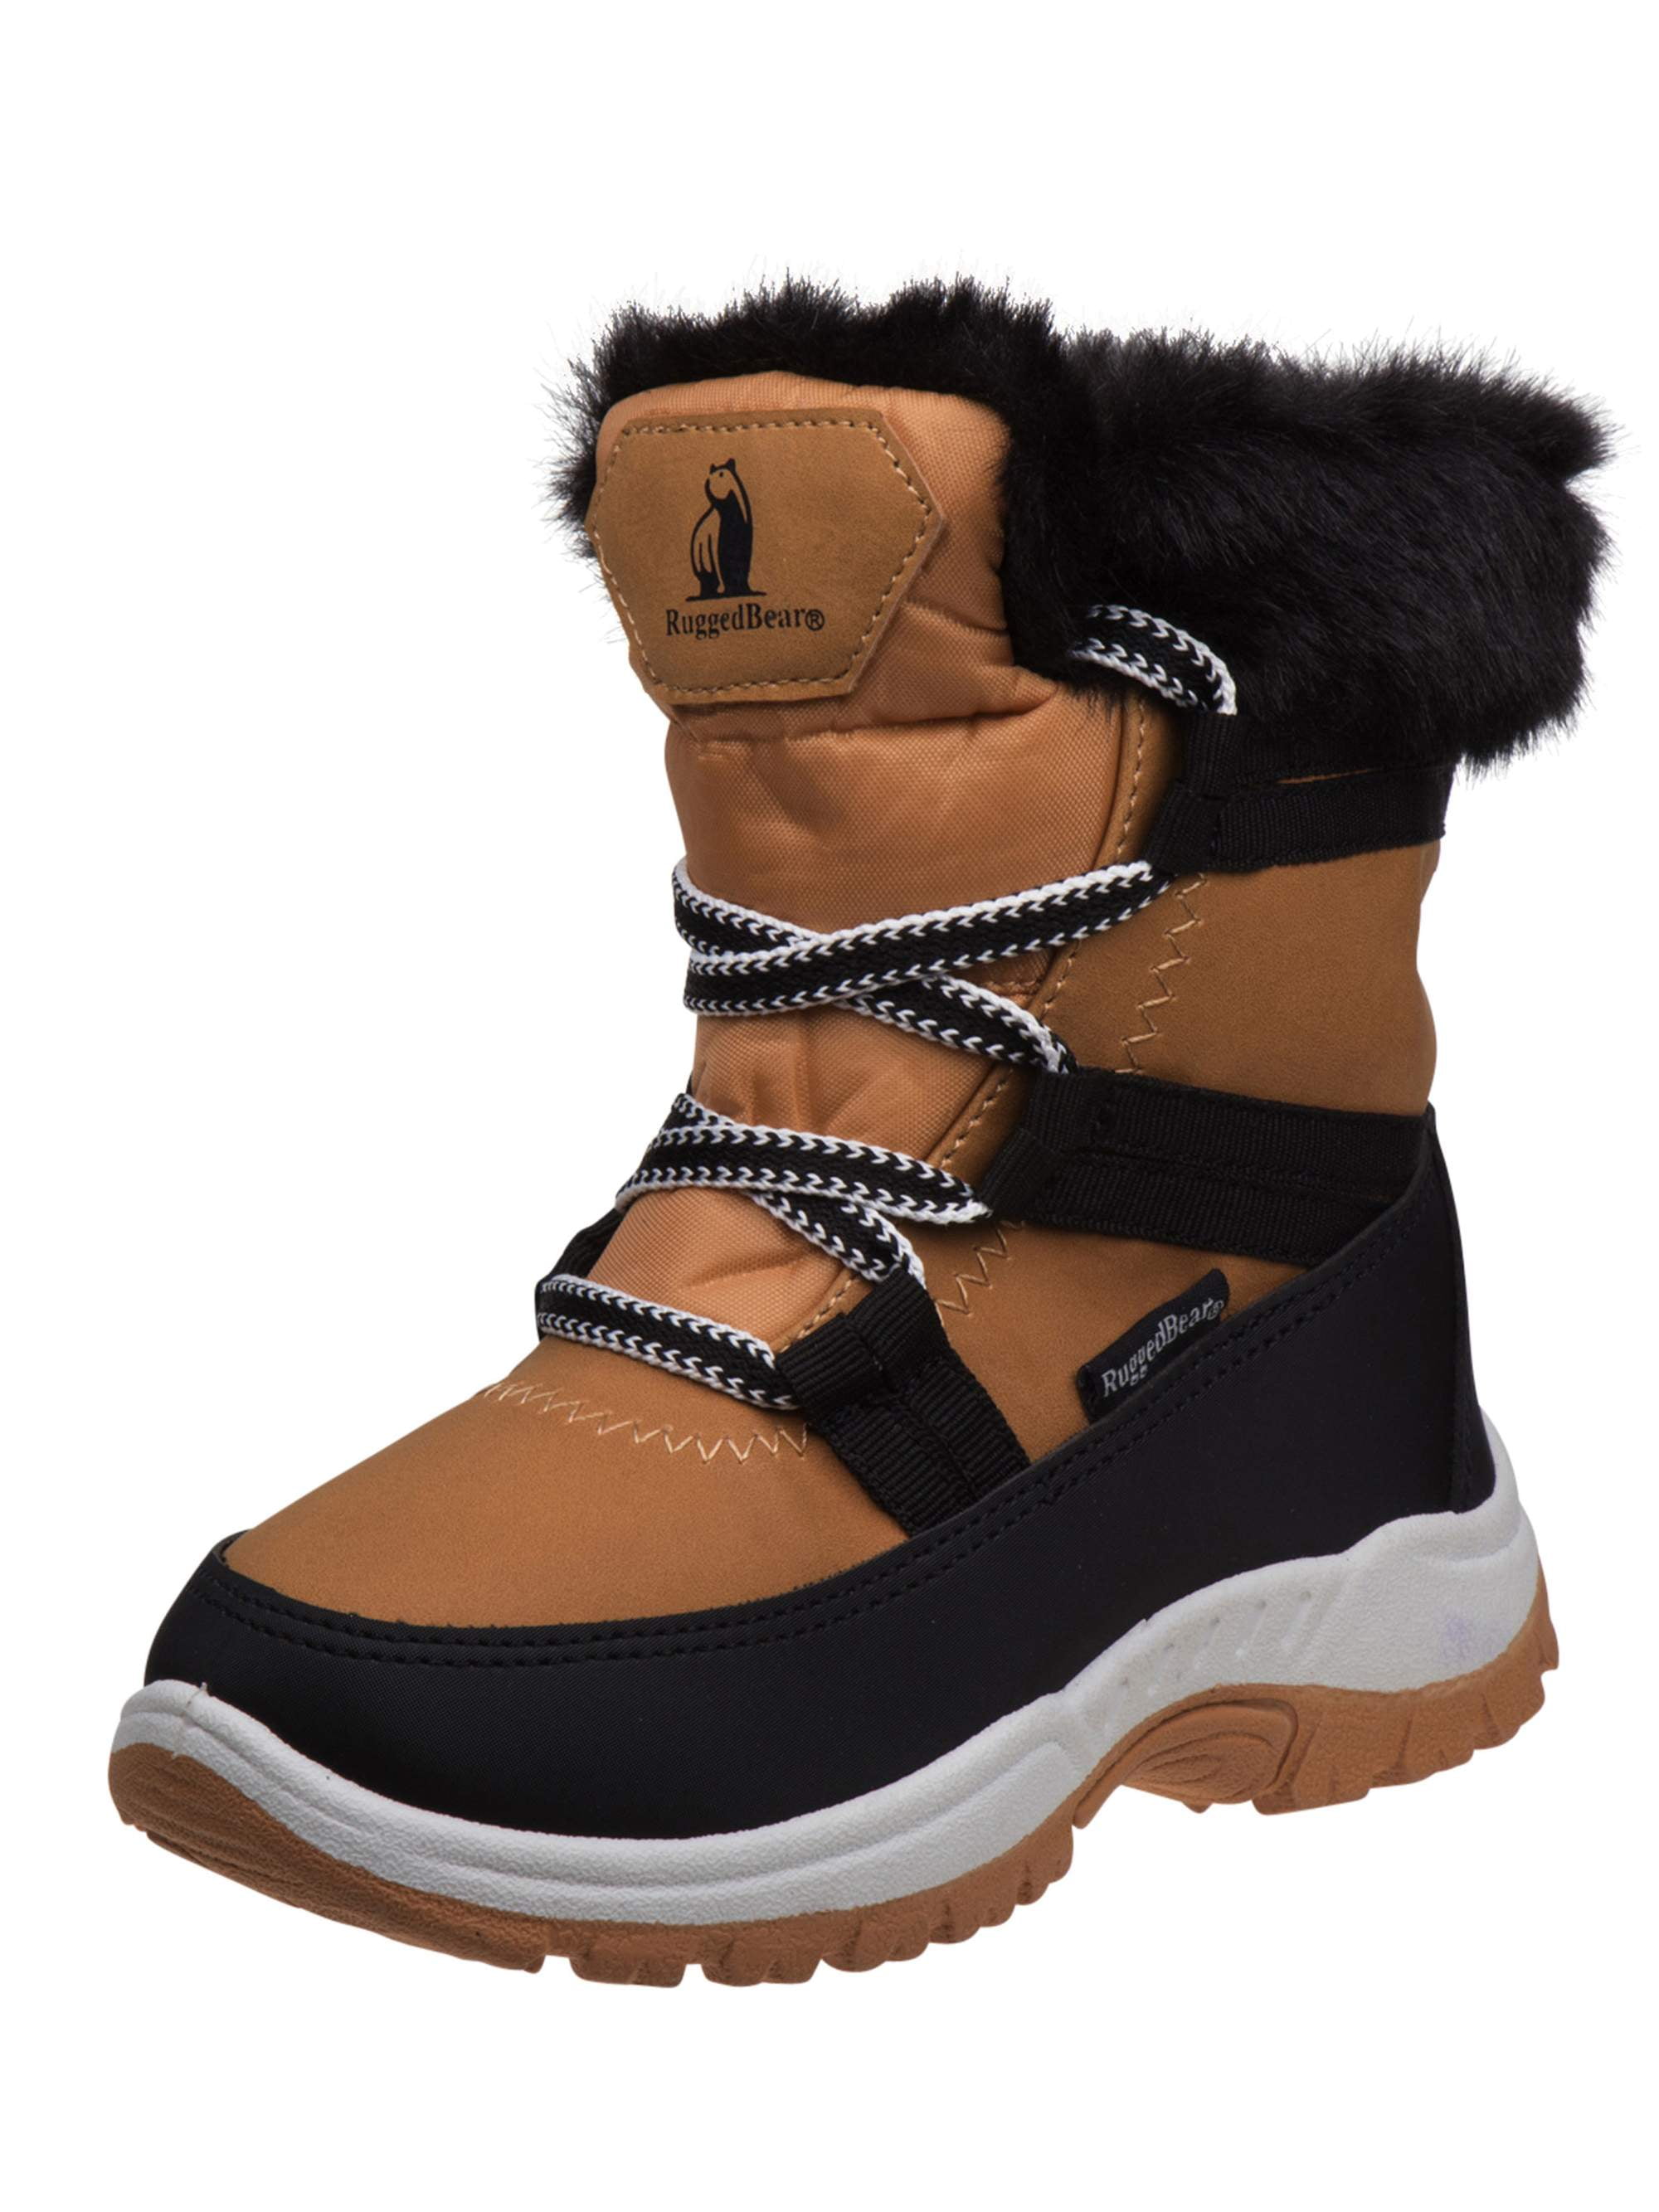 Rugged Bear Boys Lace Up Snow Boots 